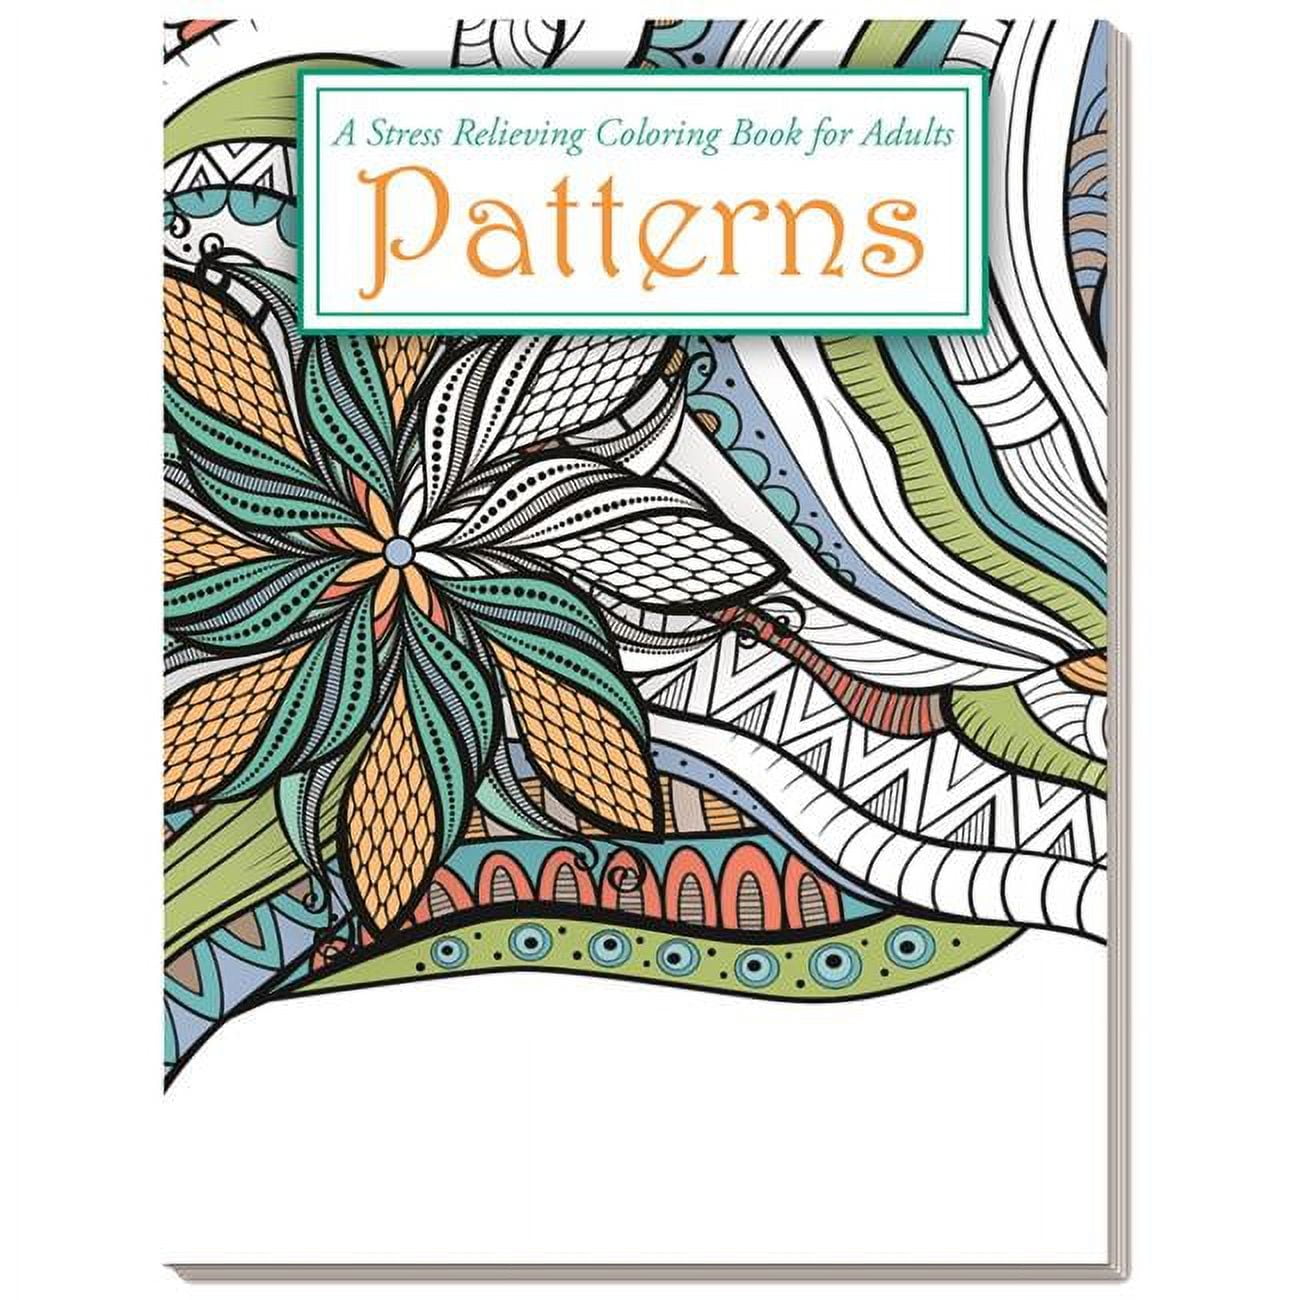 Picture of DDI 2345908 Patterns - Stress Relieving Coloring Book for Adults Case of 50